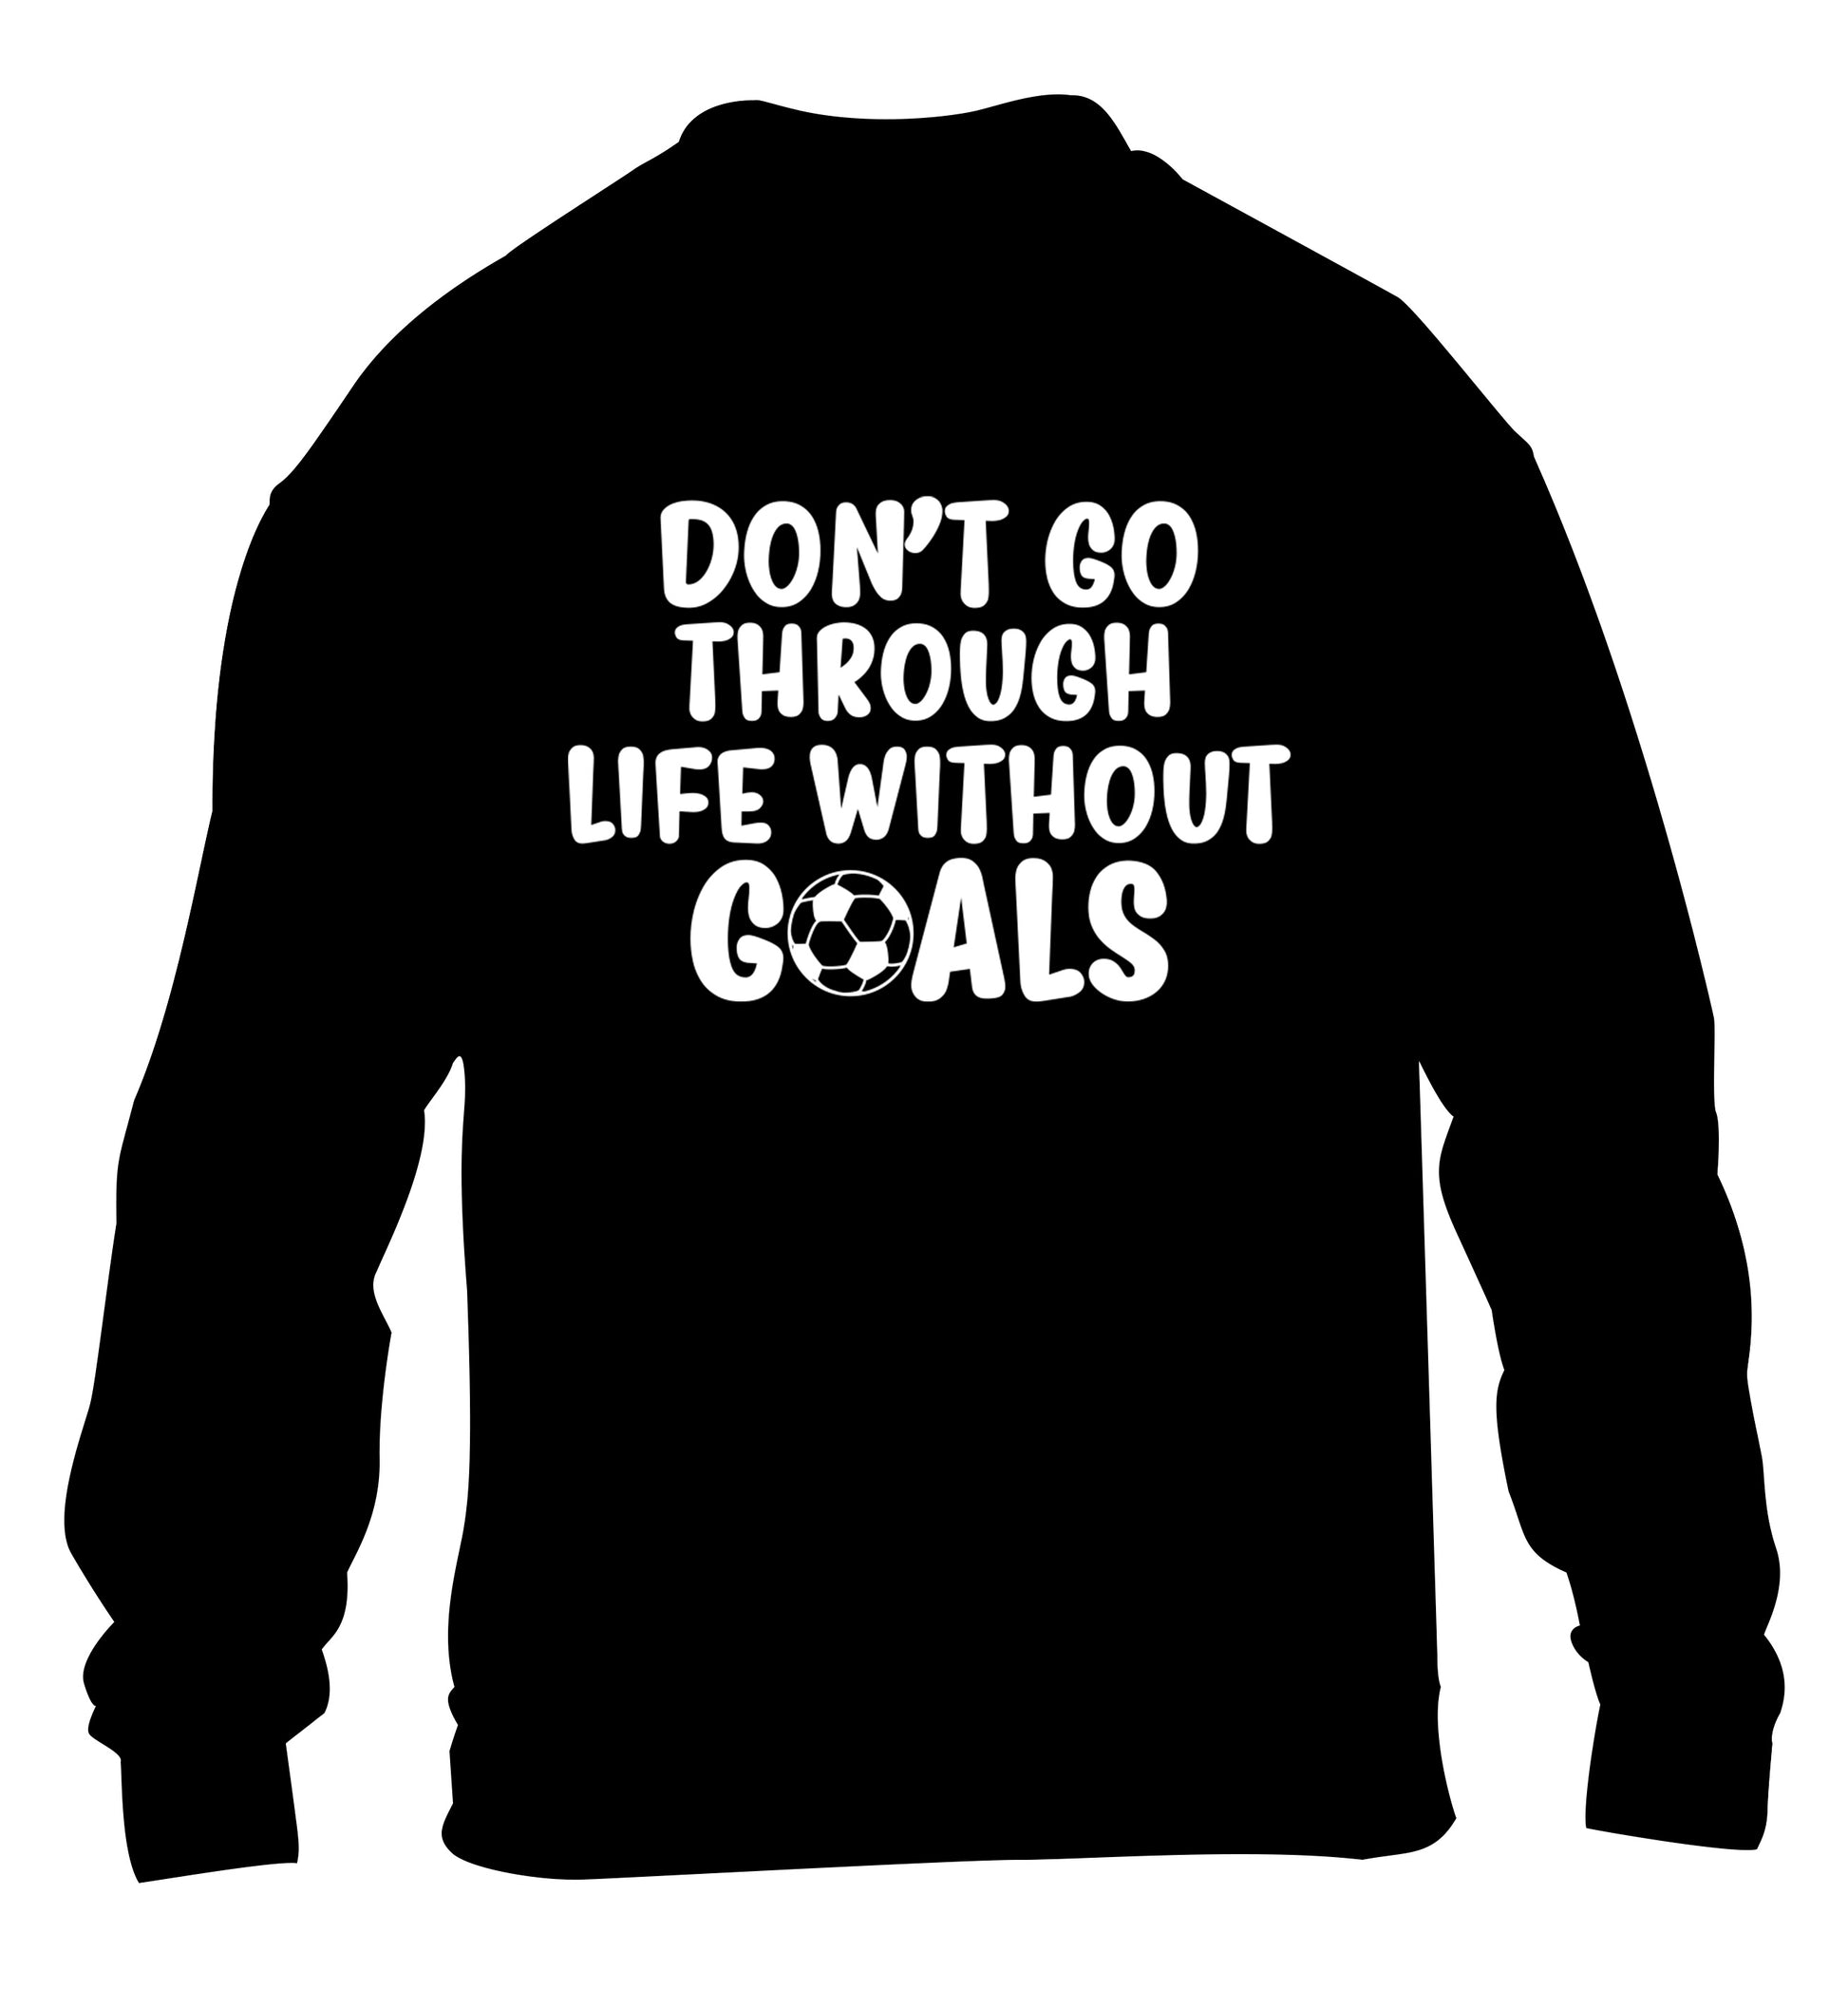 Don't go through life without goals children's black sweater 12-14 Years